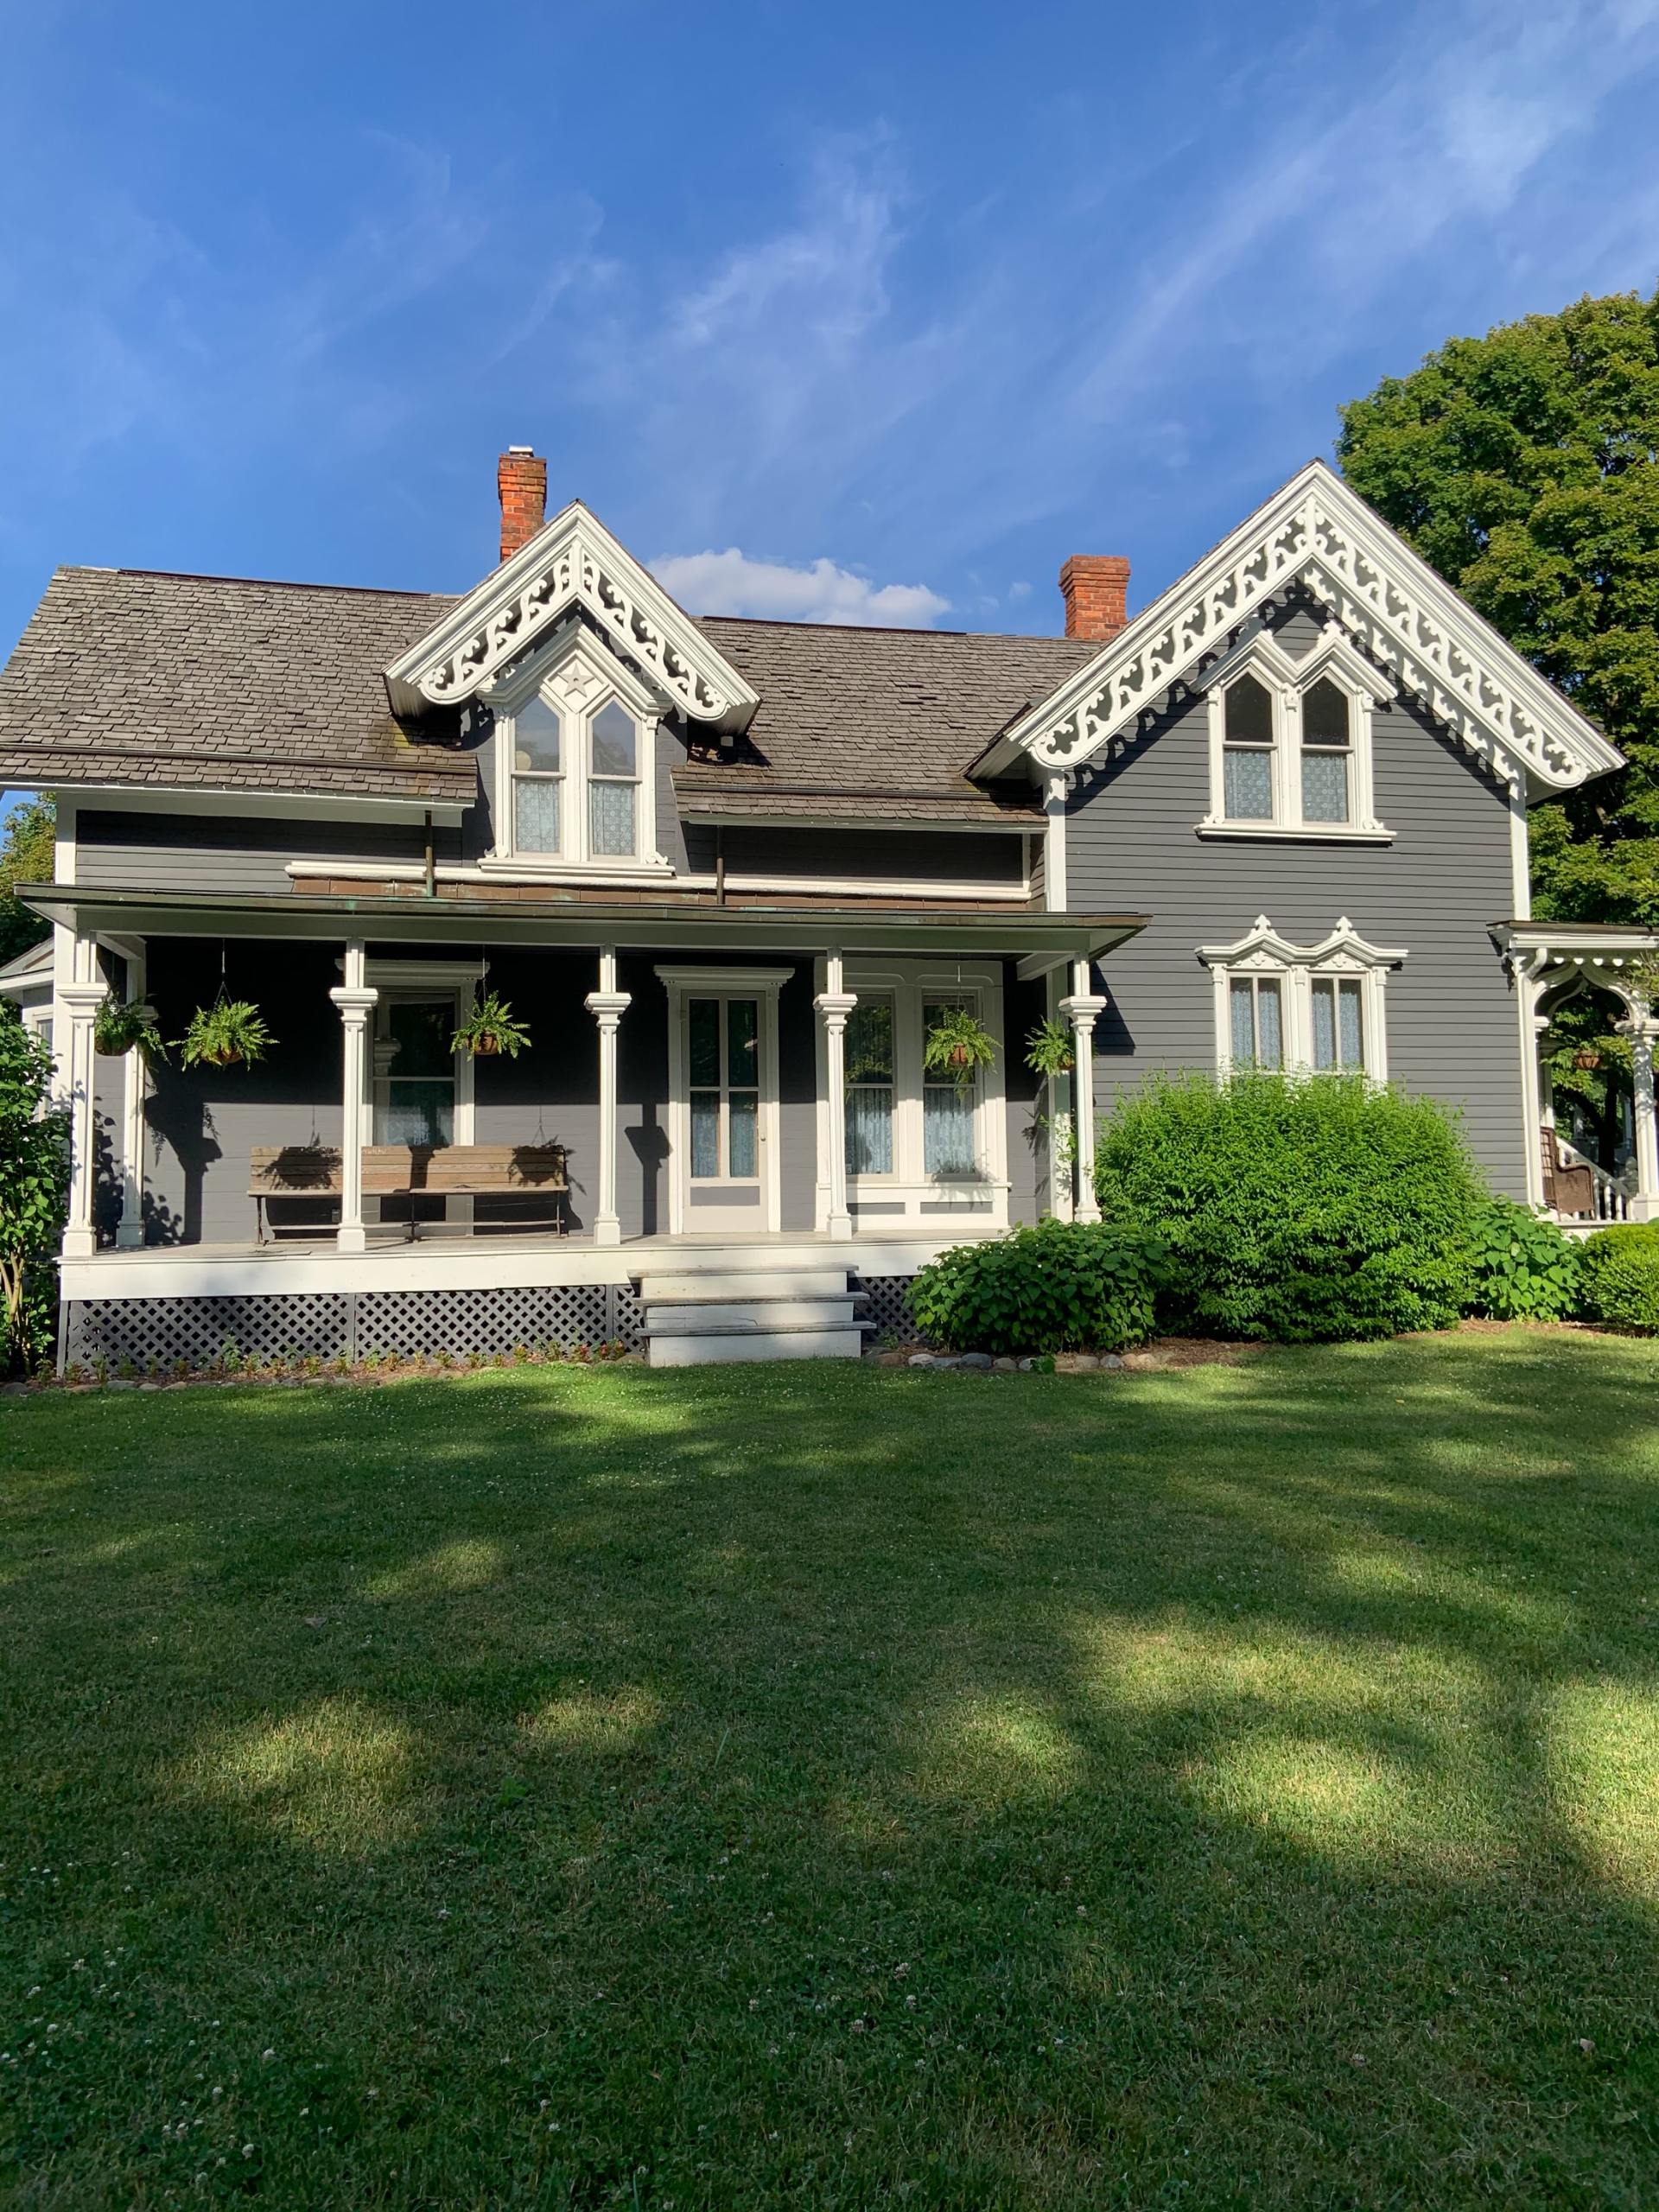 The front yard of a historic Vermont home with well-kept landscaping.